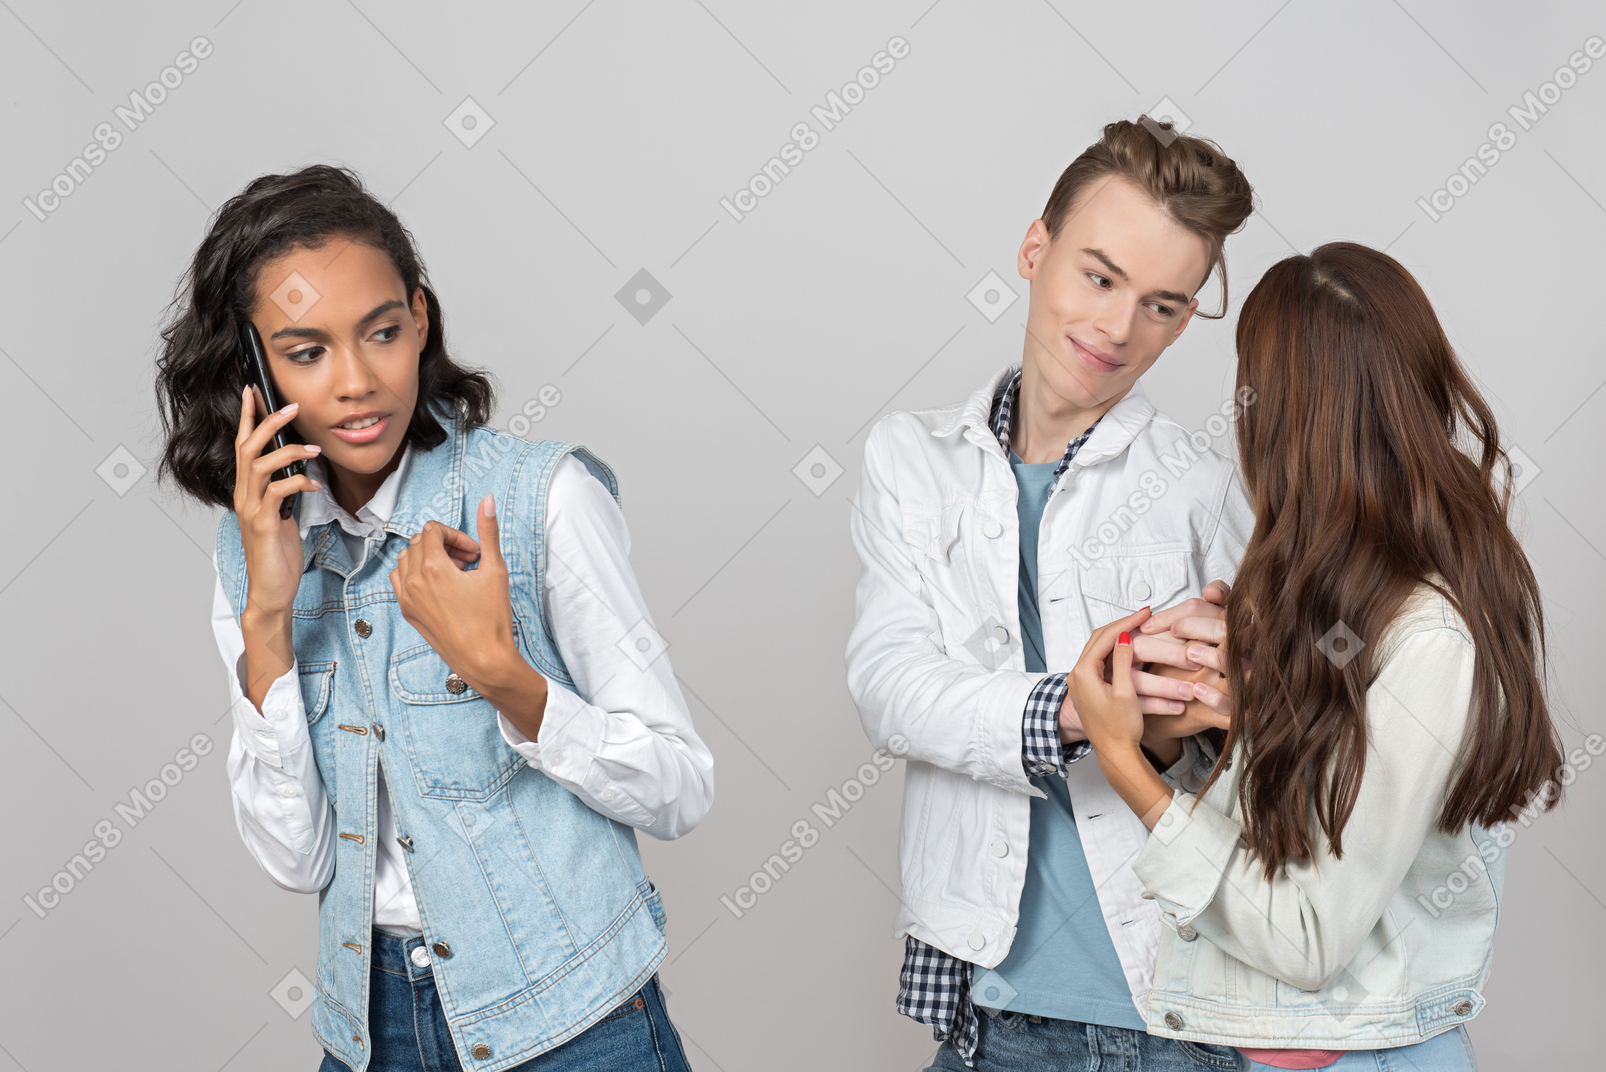 Listen, i saw your boyfriend with another girl